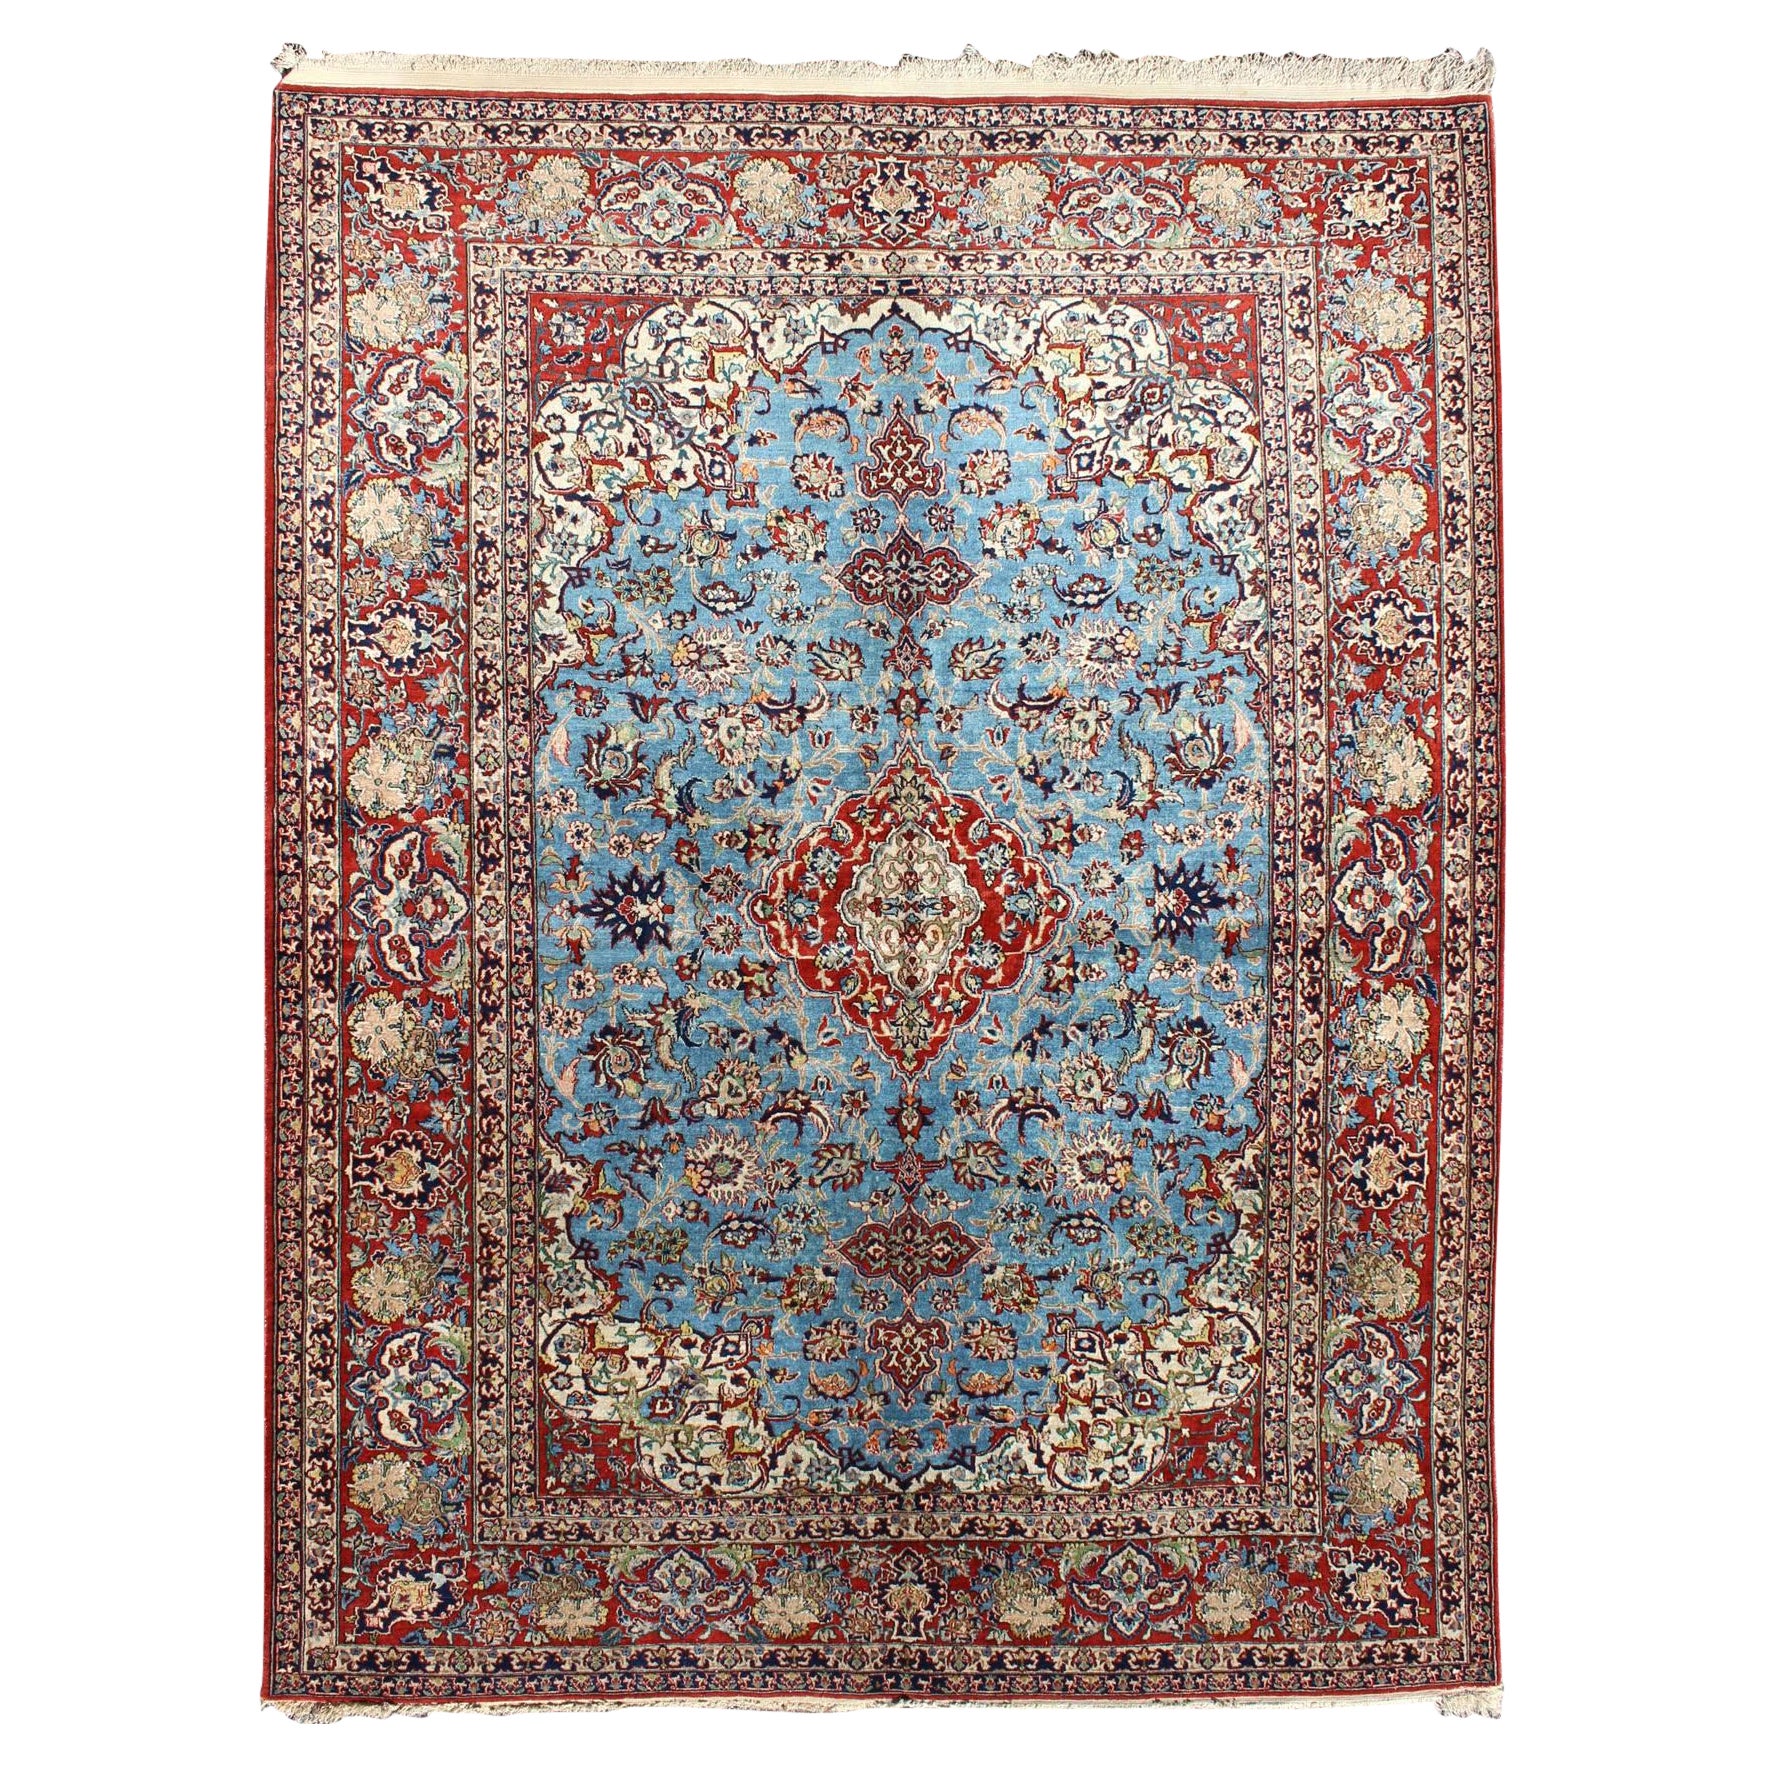 Very Fine Persian Isfahan Rug with Intricate Florals in Persian Blue & Red